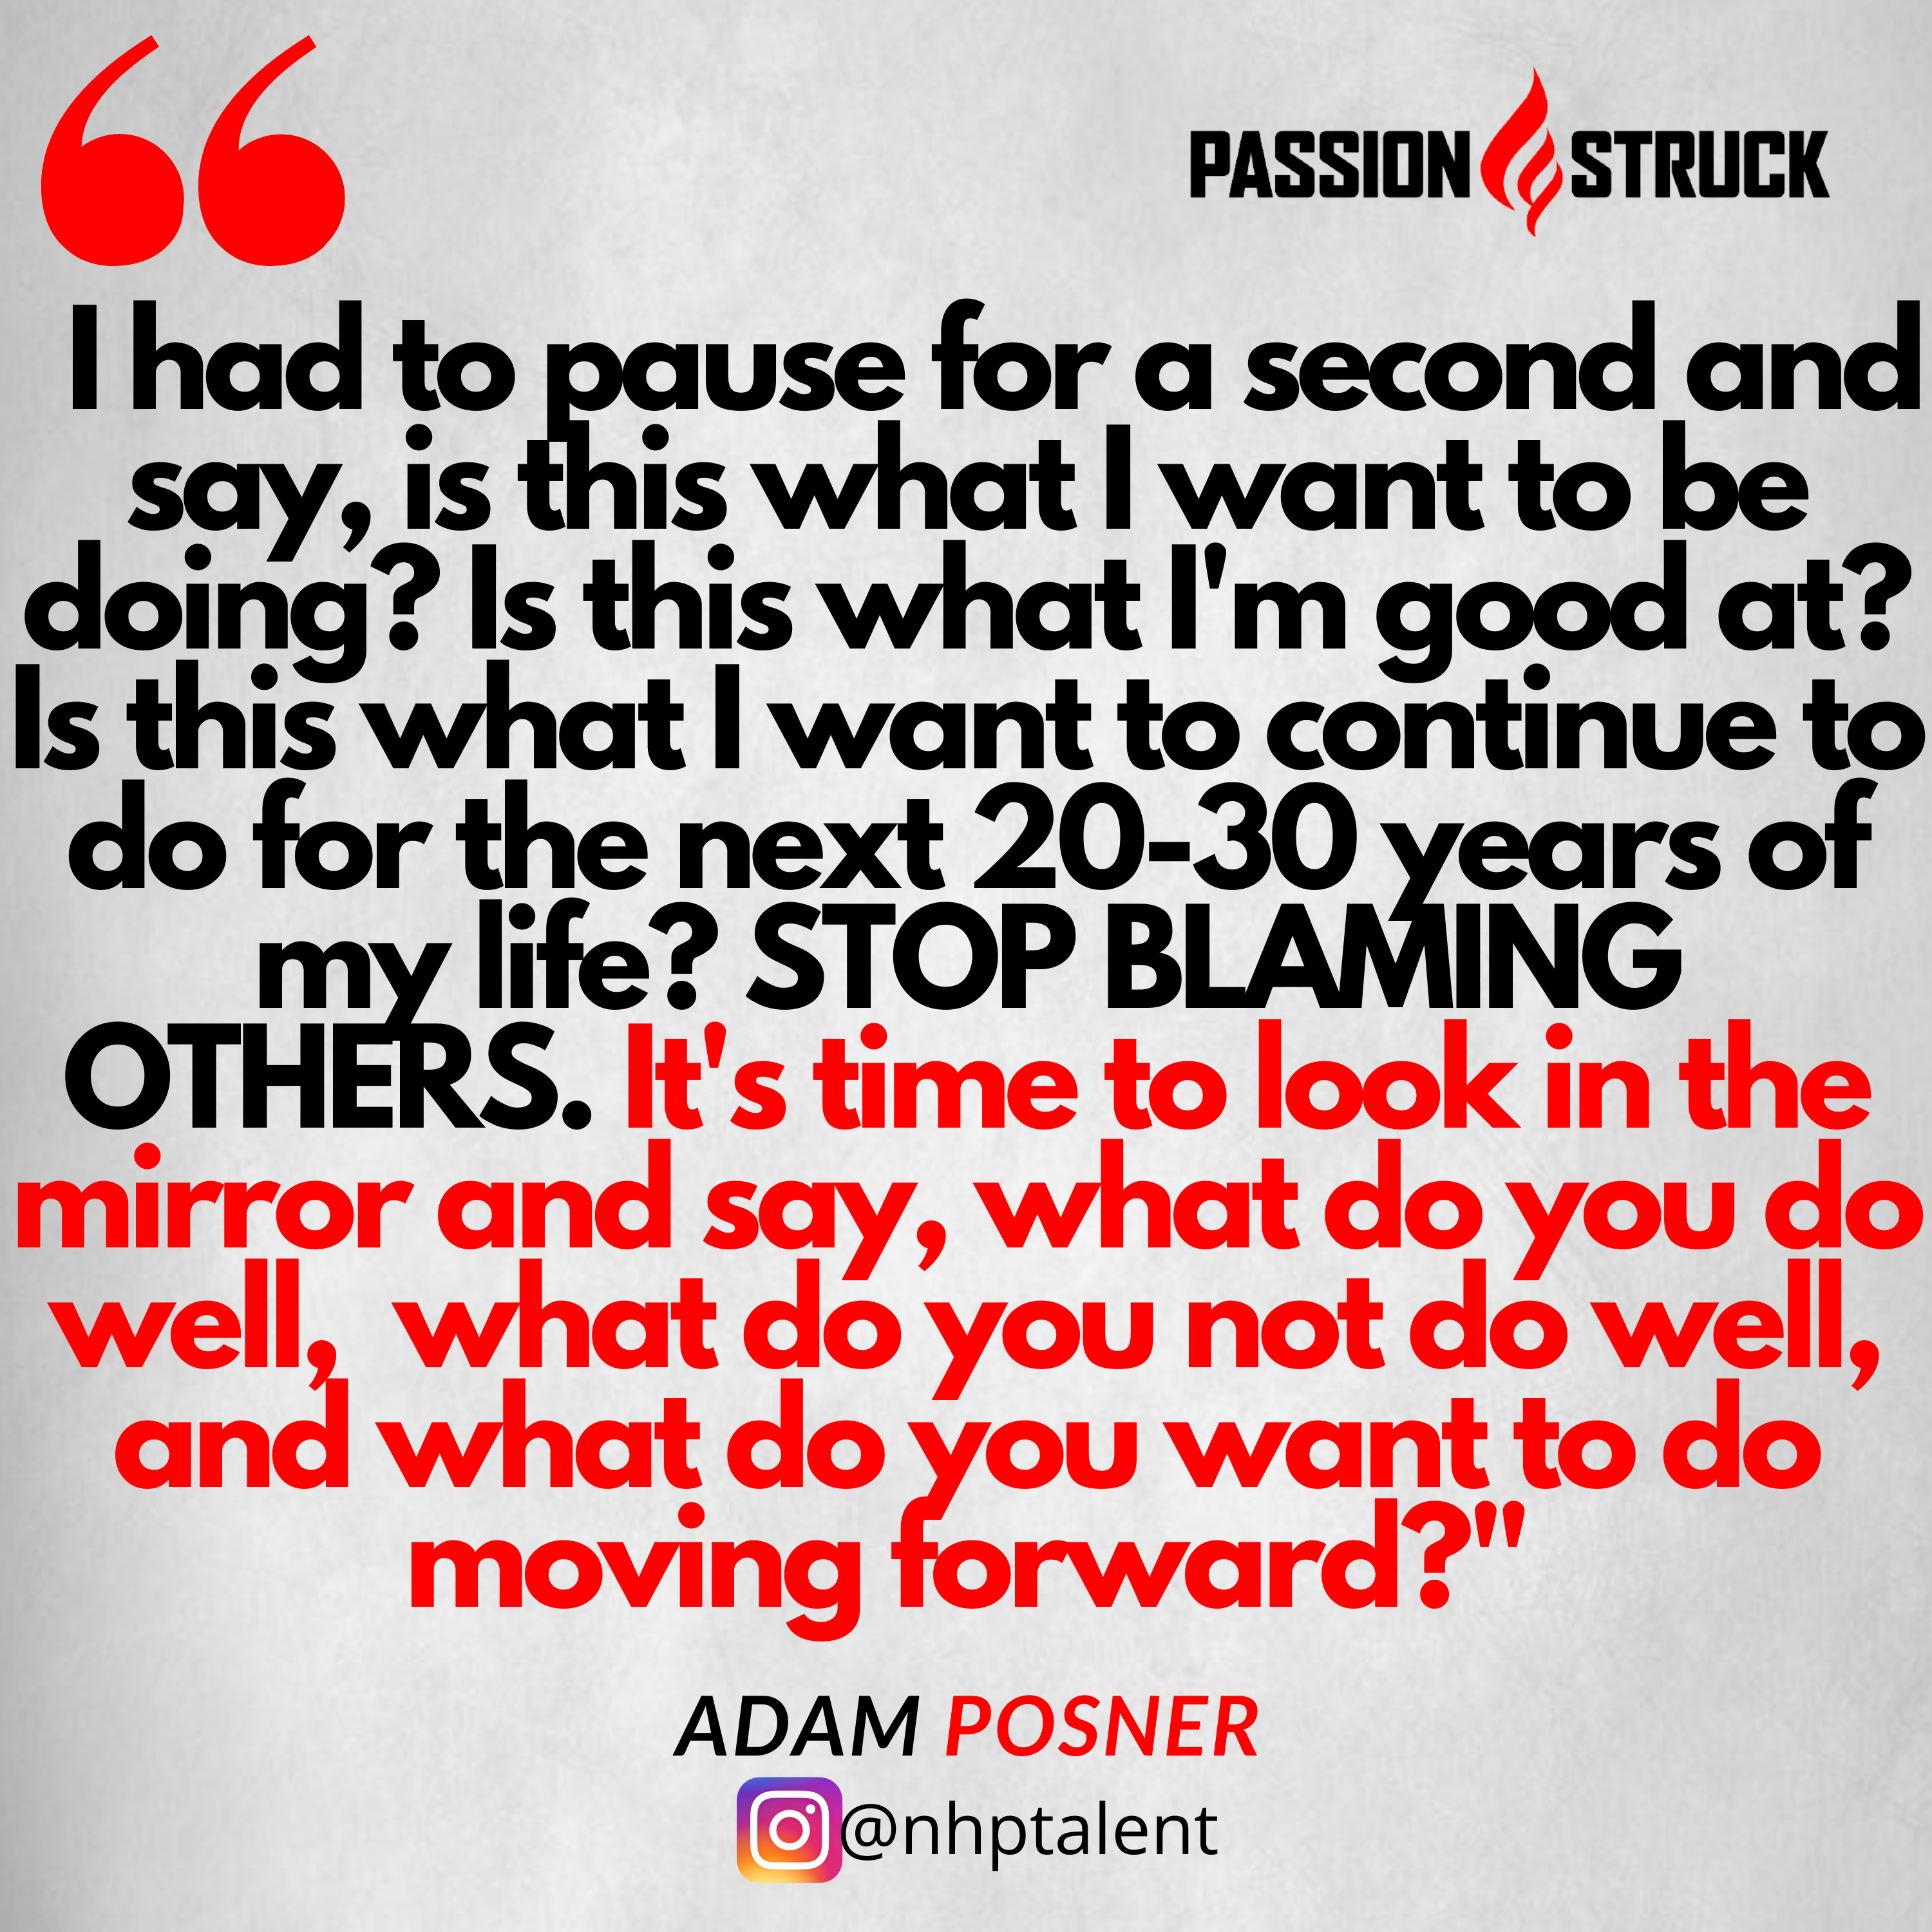 Quote by Adam Posner on how he became a powerful relationship connector